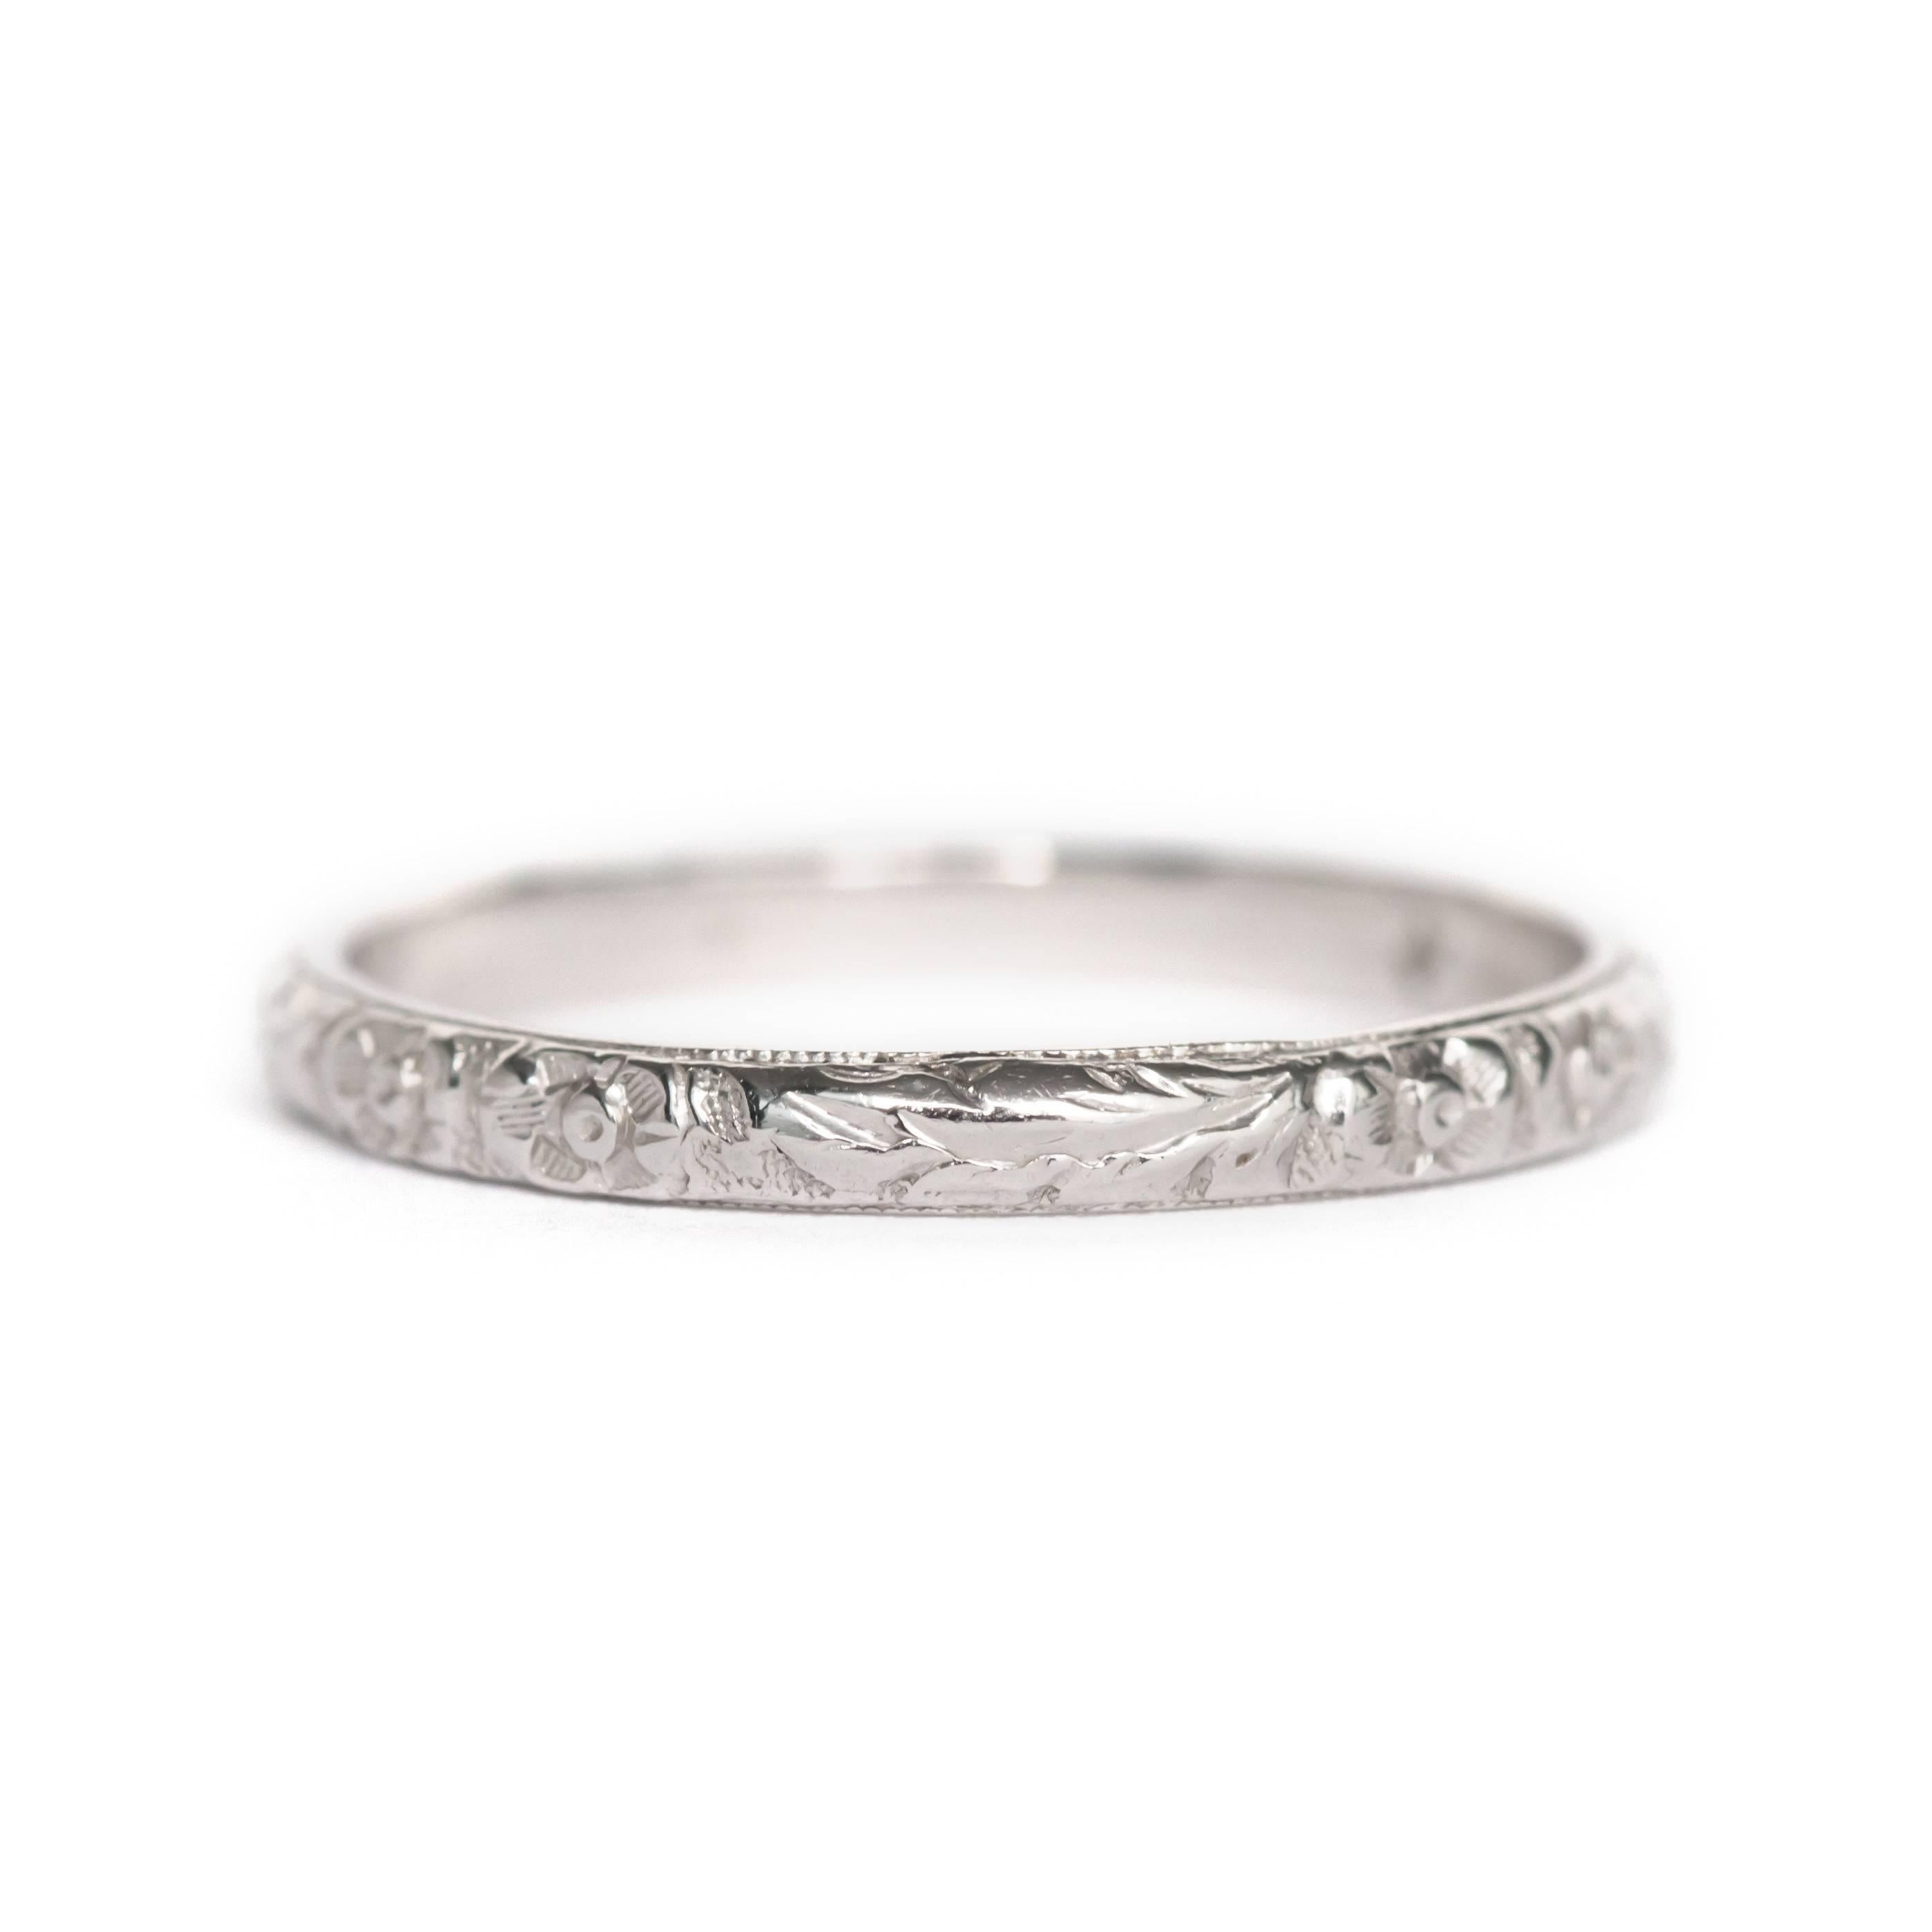 Item Details: 
Ring Size: Approximately 7.95
Metal Type: Platinum
Weight: 2.6 grams

Finger to Top of Stone Measurement: 1.40mm
